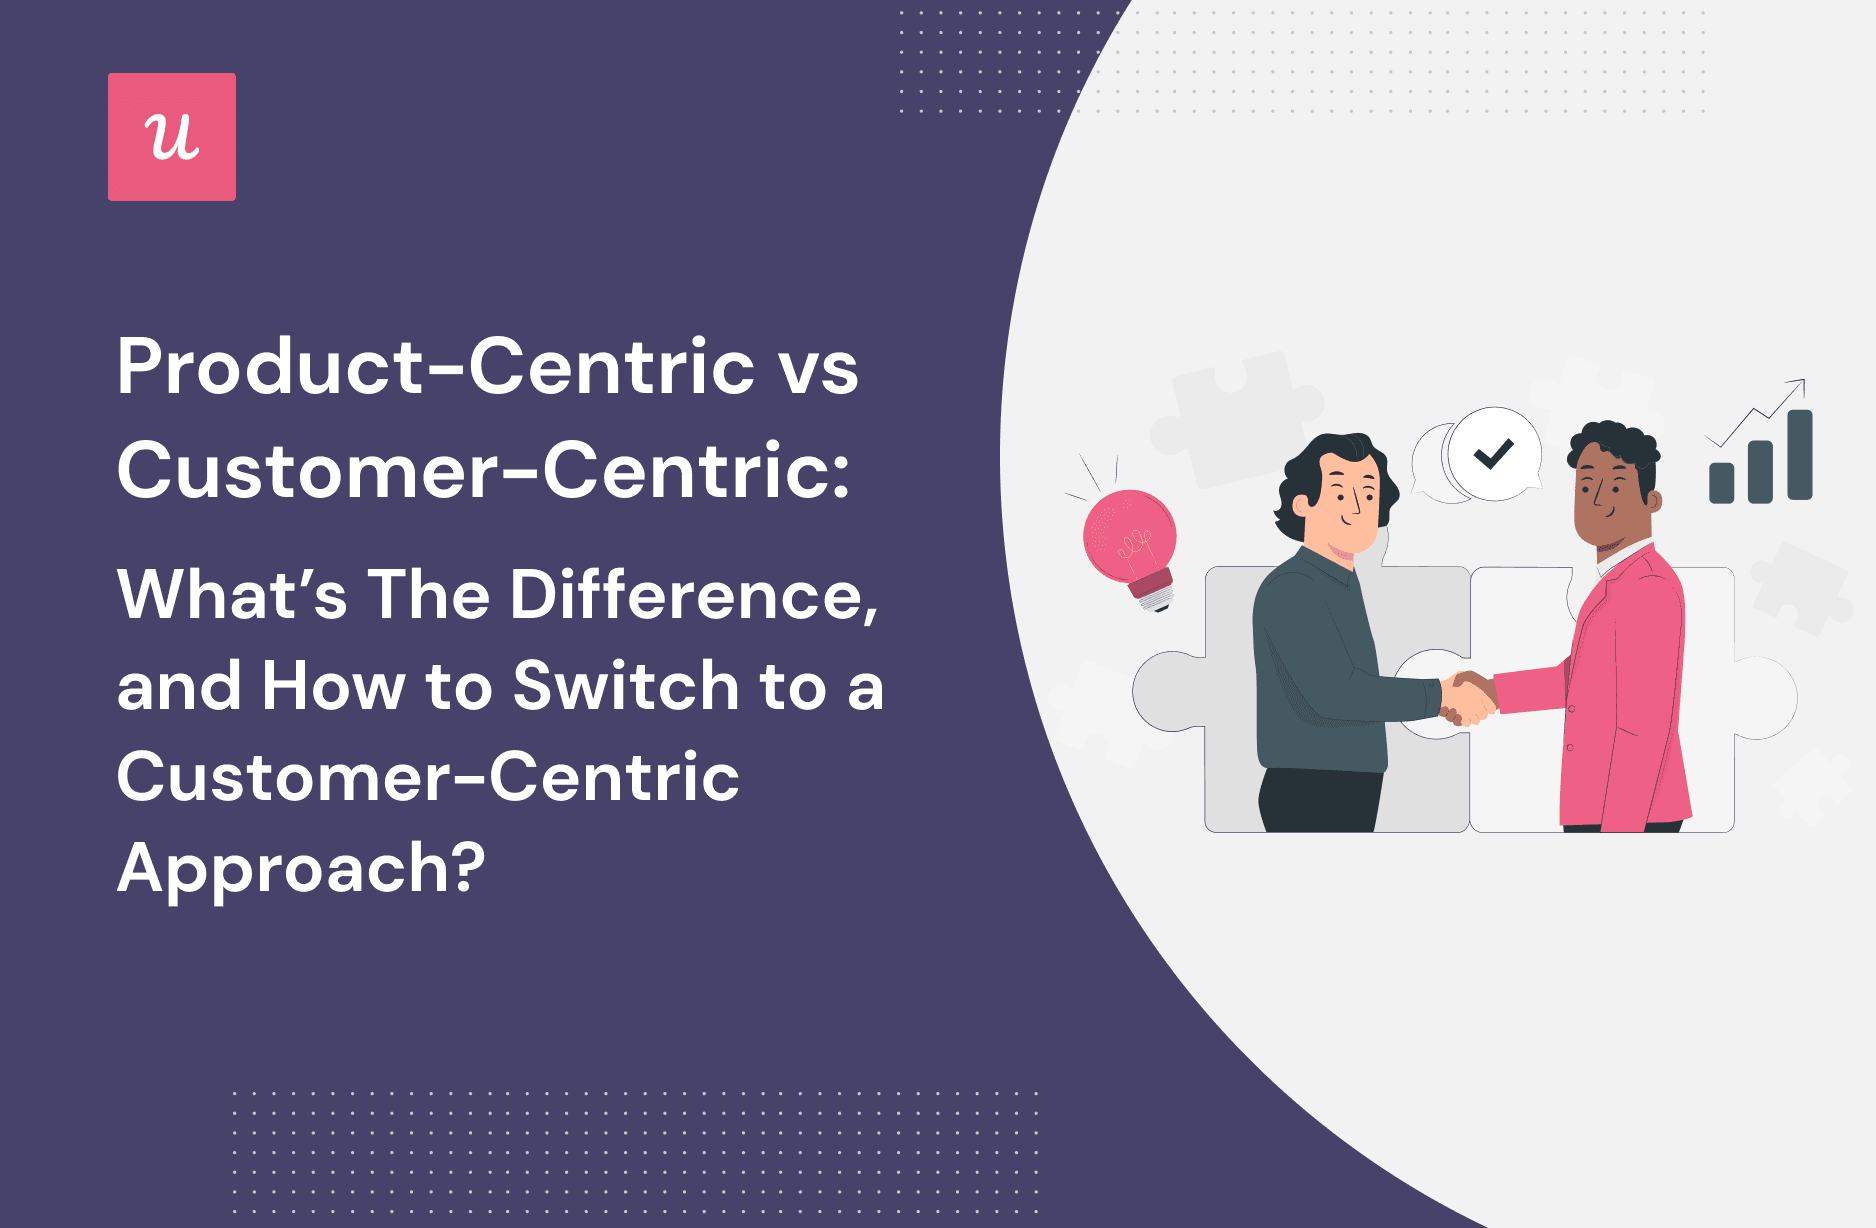 Product-Centric vs Customer-Centric: What’s the Difference, and How To Switch to a Customer-Centric Approach?